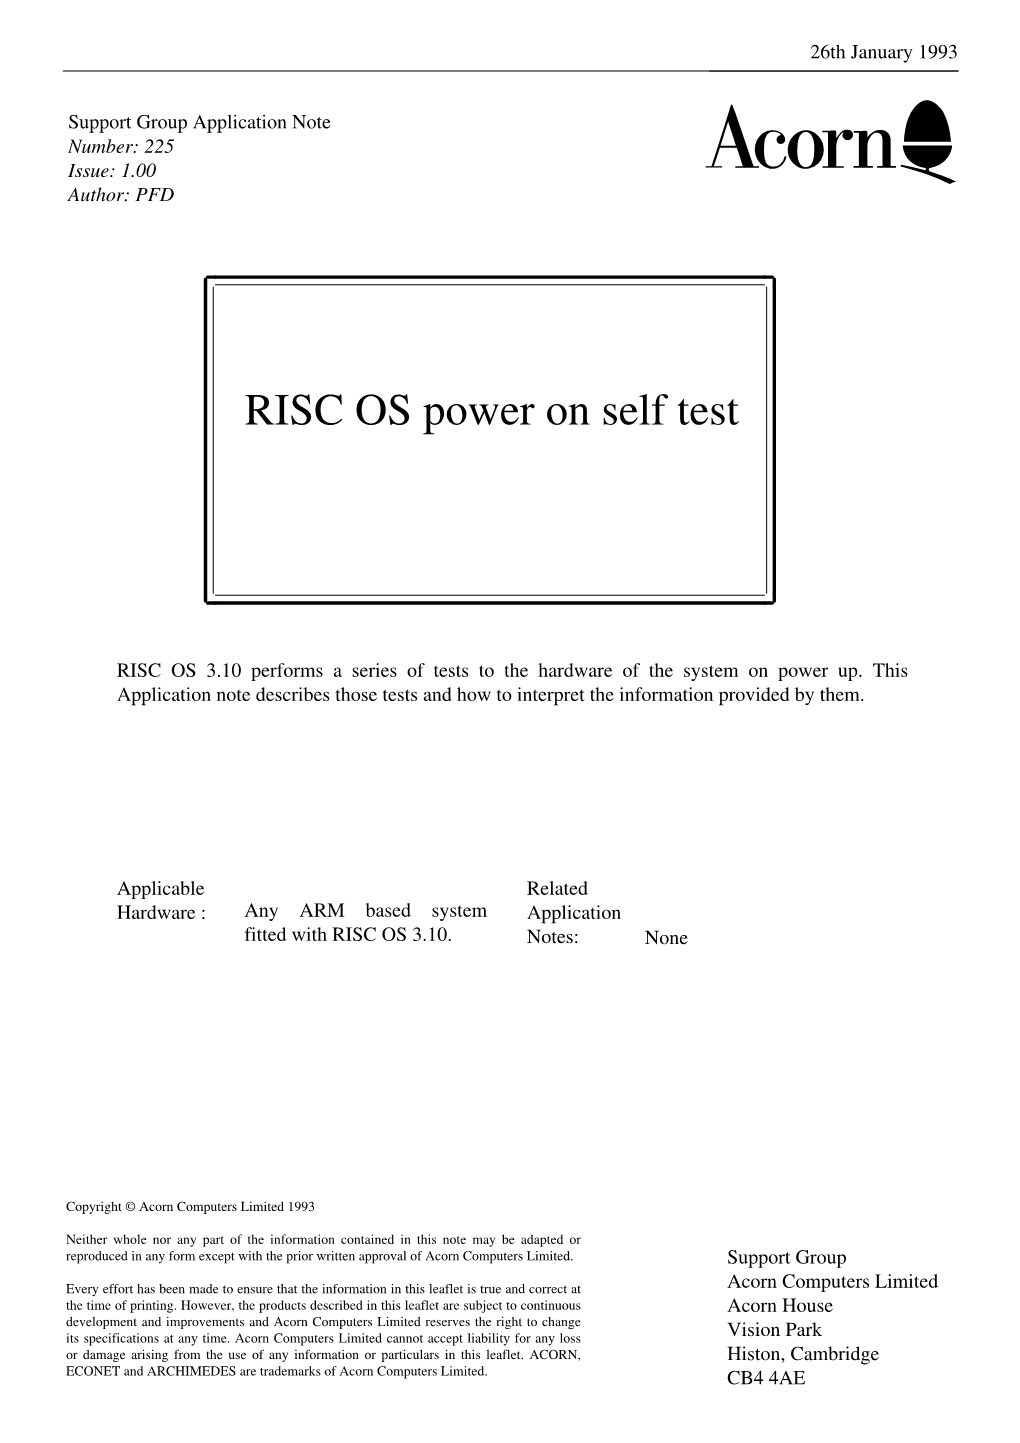 RISC OS Power on Self Test